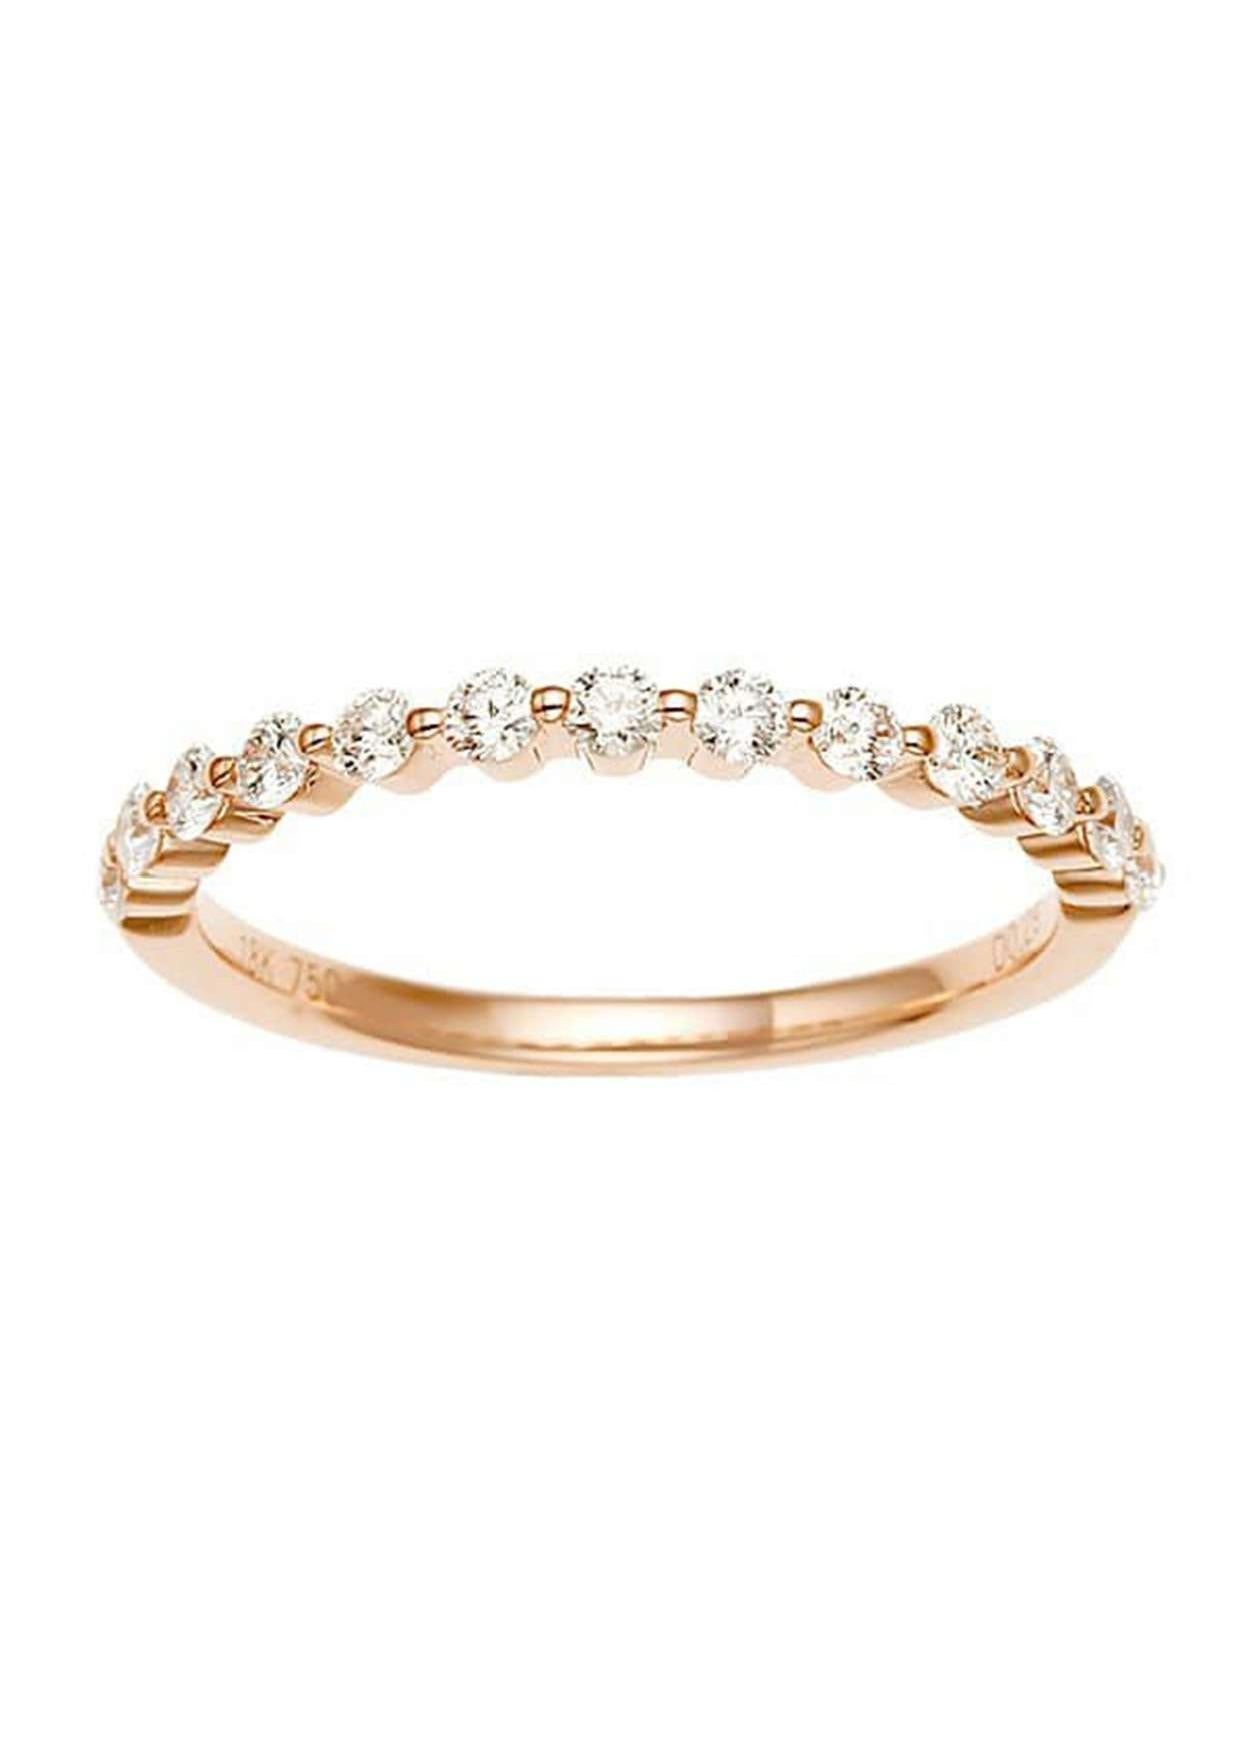 18K Pink Gold Half Eternity Diamond Ring, 0.29ct, Size 4.5 In New Condition For Sale In Holtsville, NY